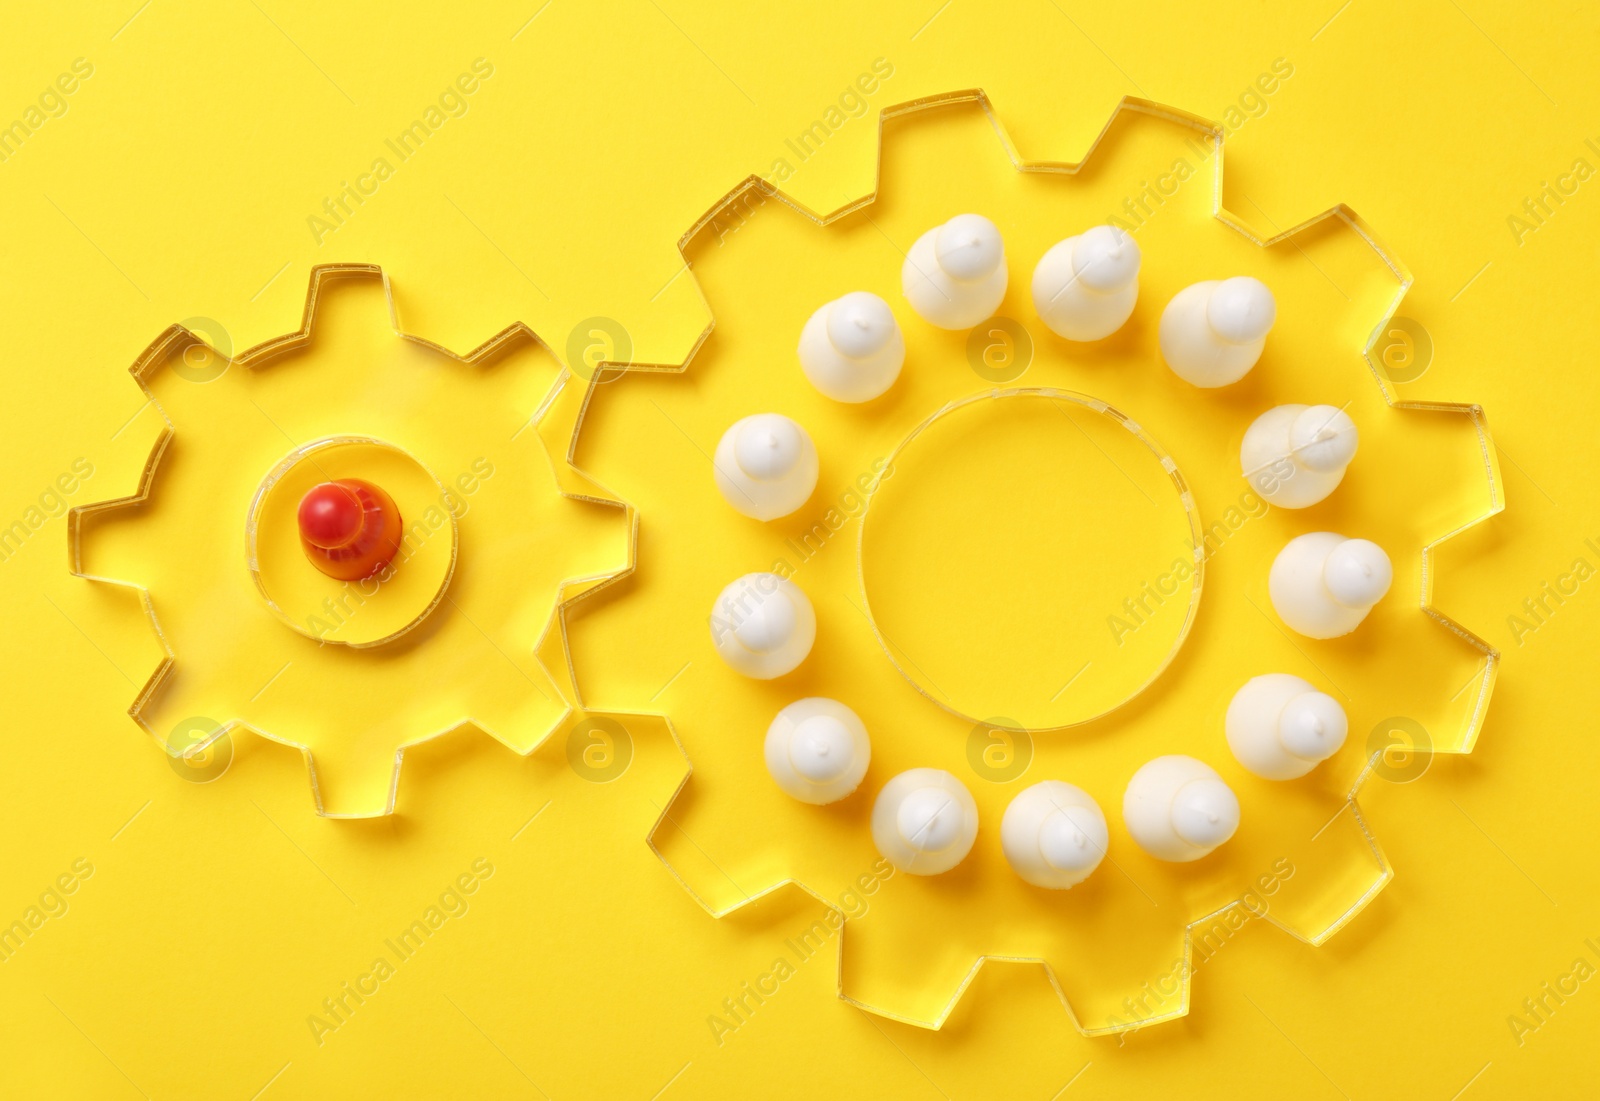 Photo of Employee selection process. Flat lay composition with cogwheels, red pawn as recruiter and white ones as applicants on yellow background